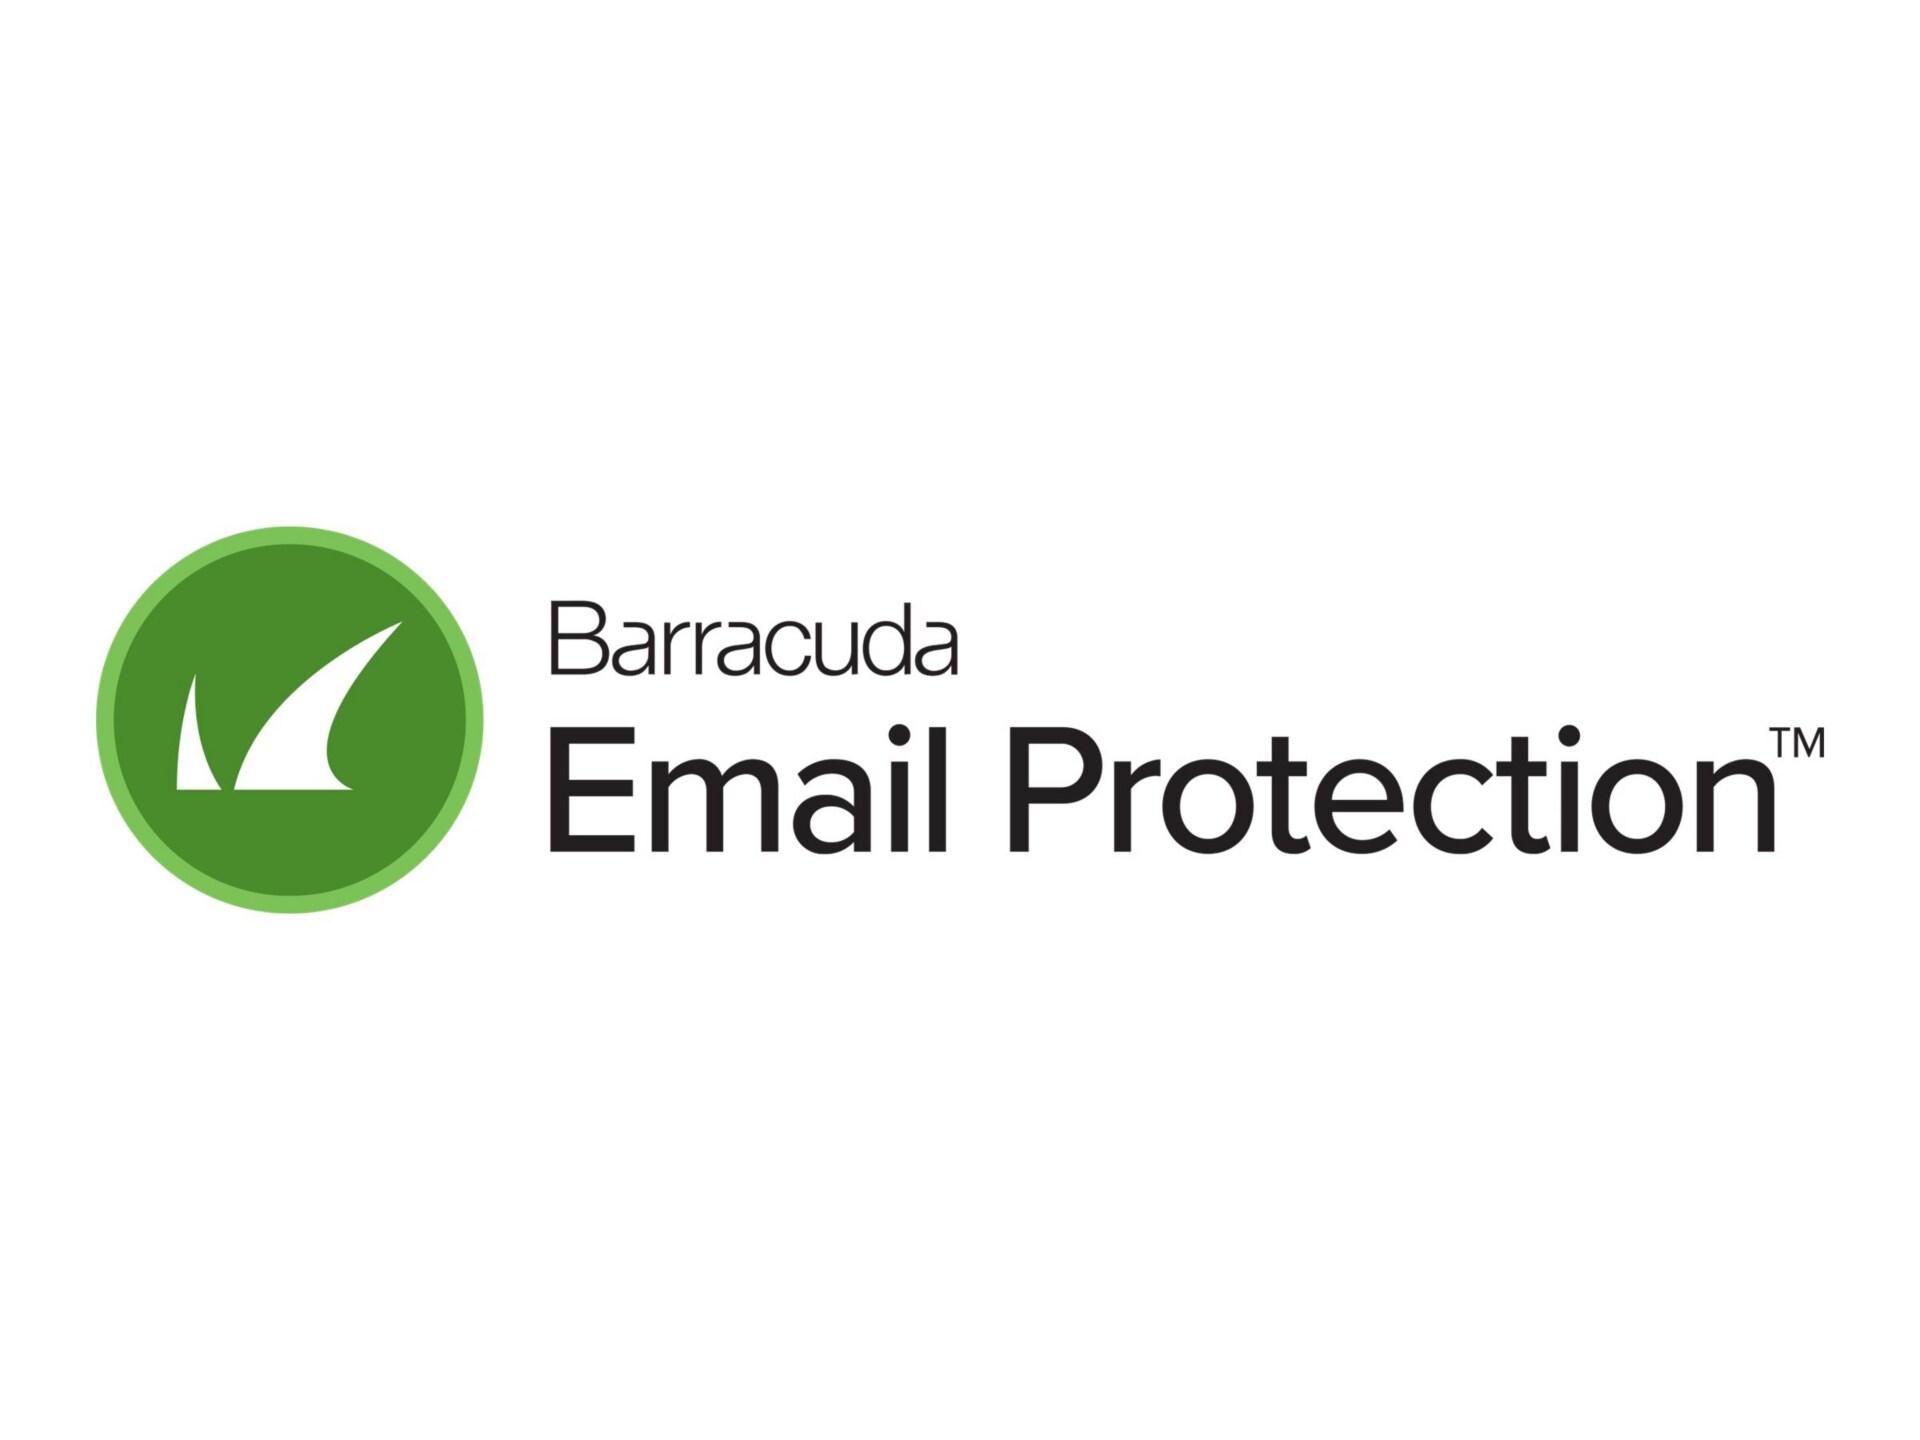 Barracuda E-Mail Protection Email Gateway Defense - subscription license (1